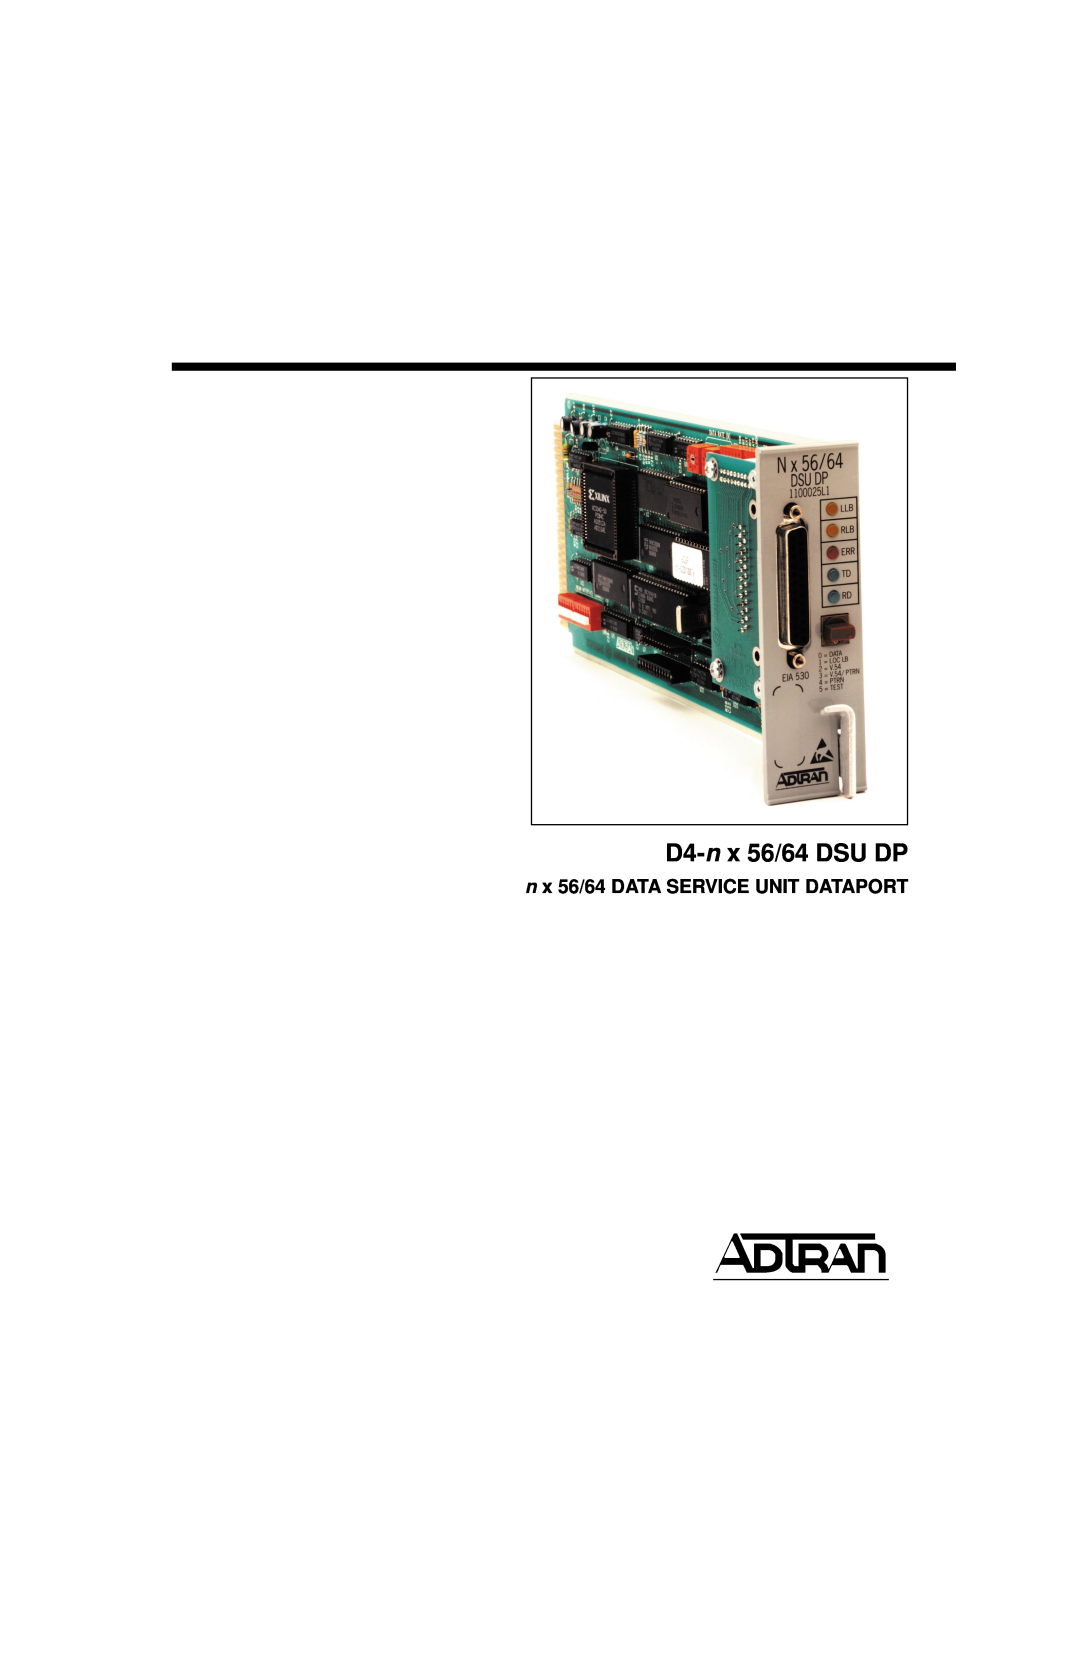 ADTRAN D4-n x 64 DSU DP, D4-n x 56 DSU DP manual D4-n x 56/64 DSU DP, n x 56/64 DATA SERVICE UNIT DATAPORT, Page, Section 